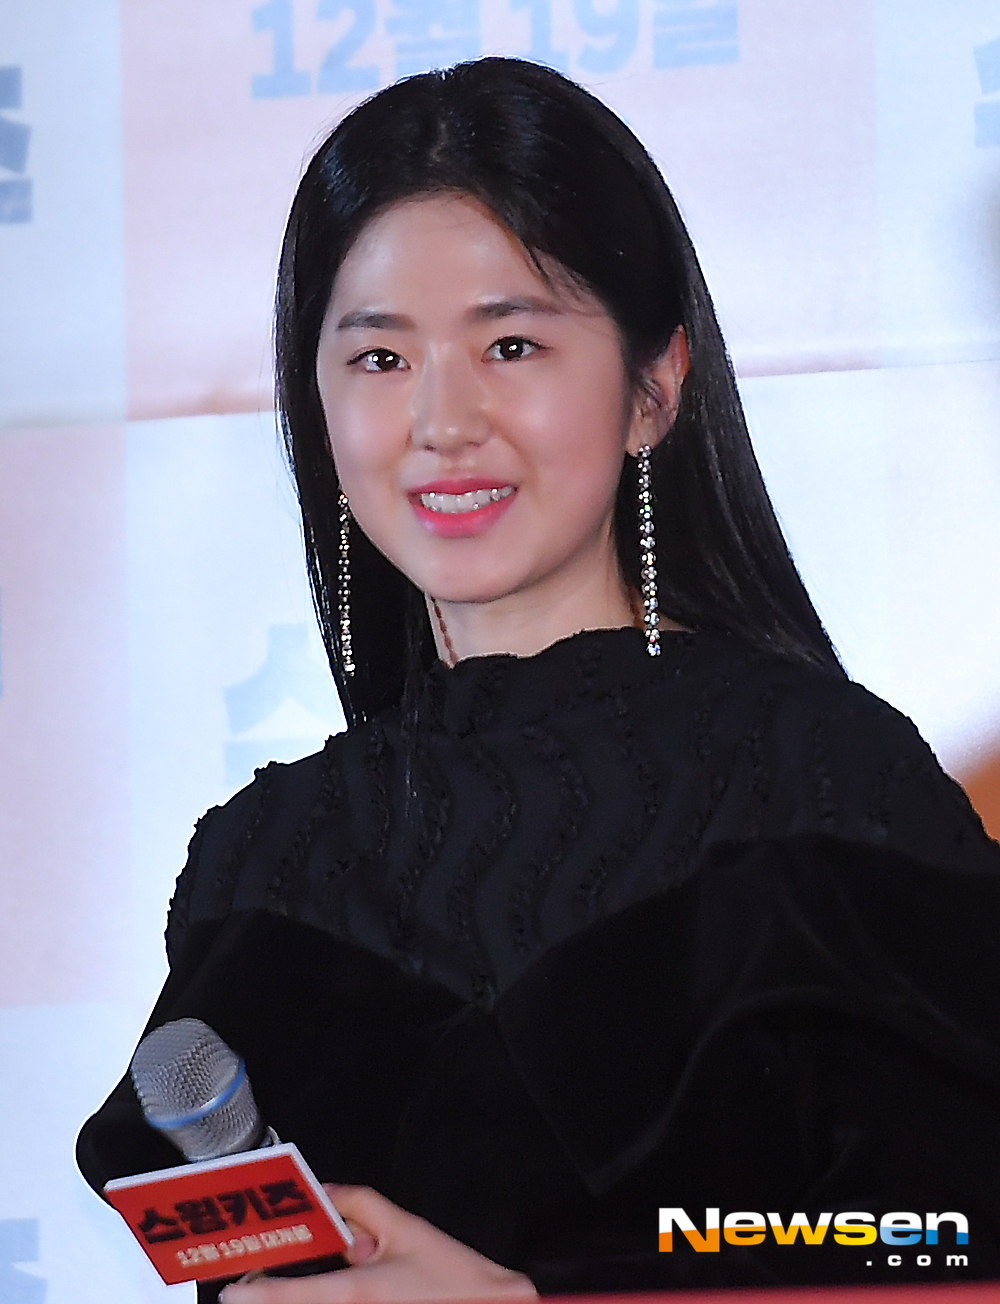 The premiere of the movie Swing Kids was held at CGV Yongsan I-Park Mall in Yongsan-gu, Seoul on the afternoon of December 4Park Hye-soo is responding to the interview.The premiere was attended by Do Kyung-soo, Park Hye-soo, Oh Jung-se and Kim Hyung-chul.